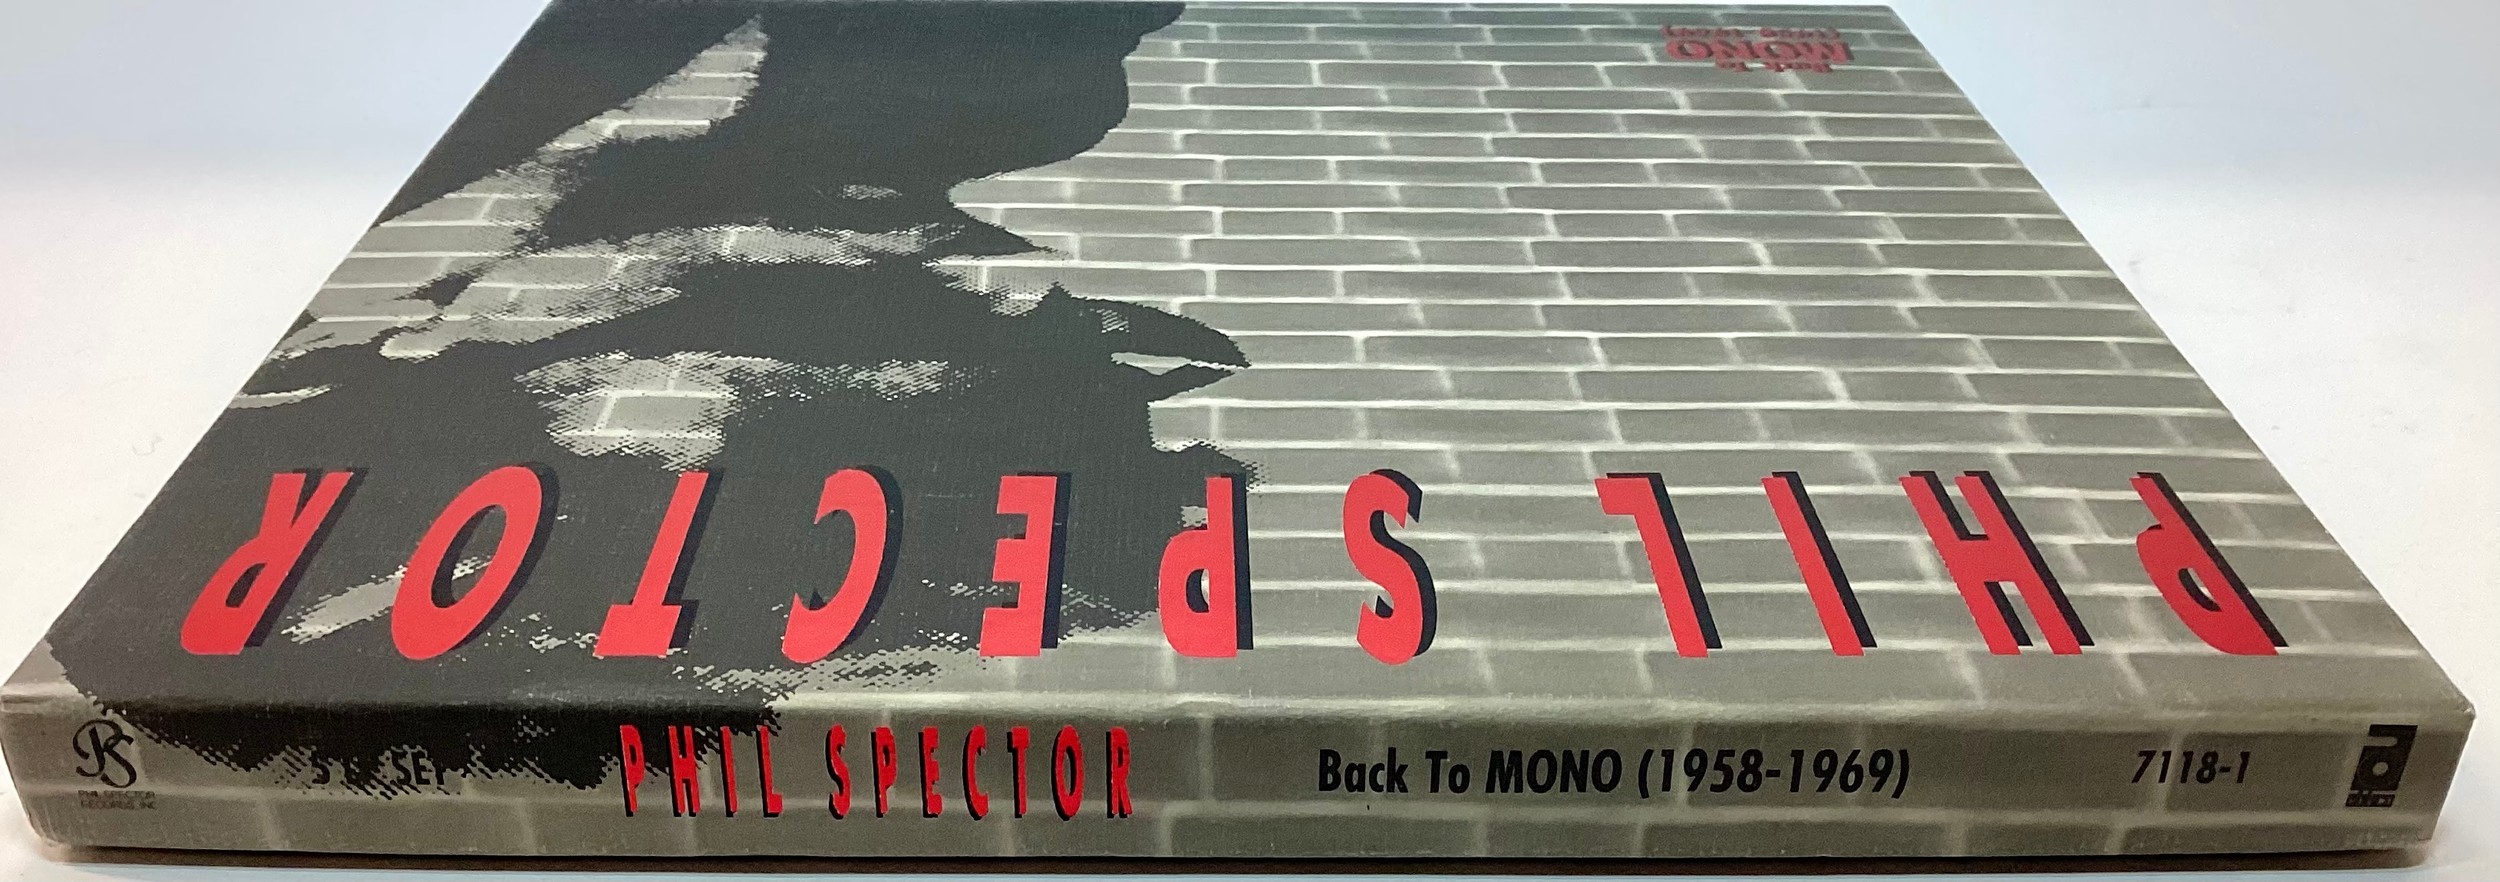 PHIL SPECTOR - BACK TO MONO (1958-1969) 5LP BOX SET. Phil Spector: Back To Mono 1958-1969 is a - Image 3 of 8